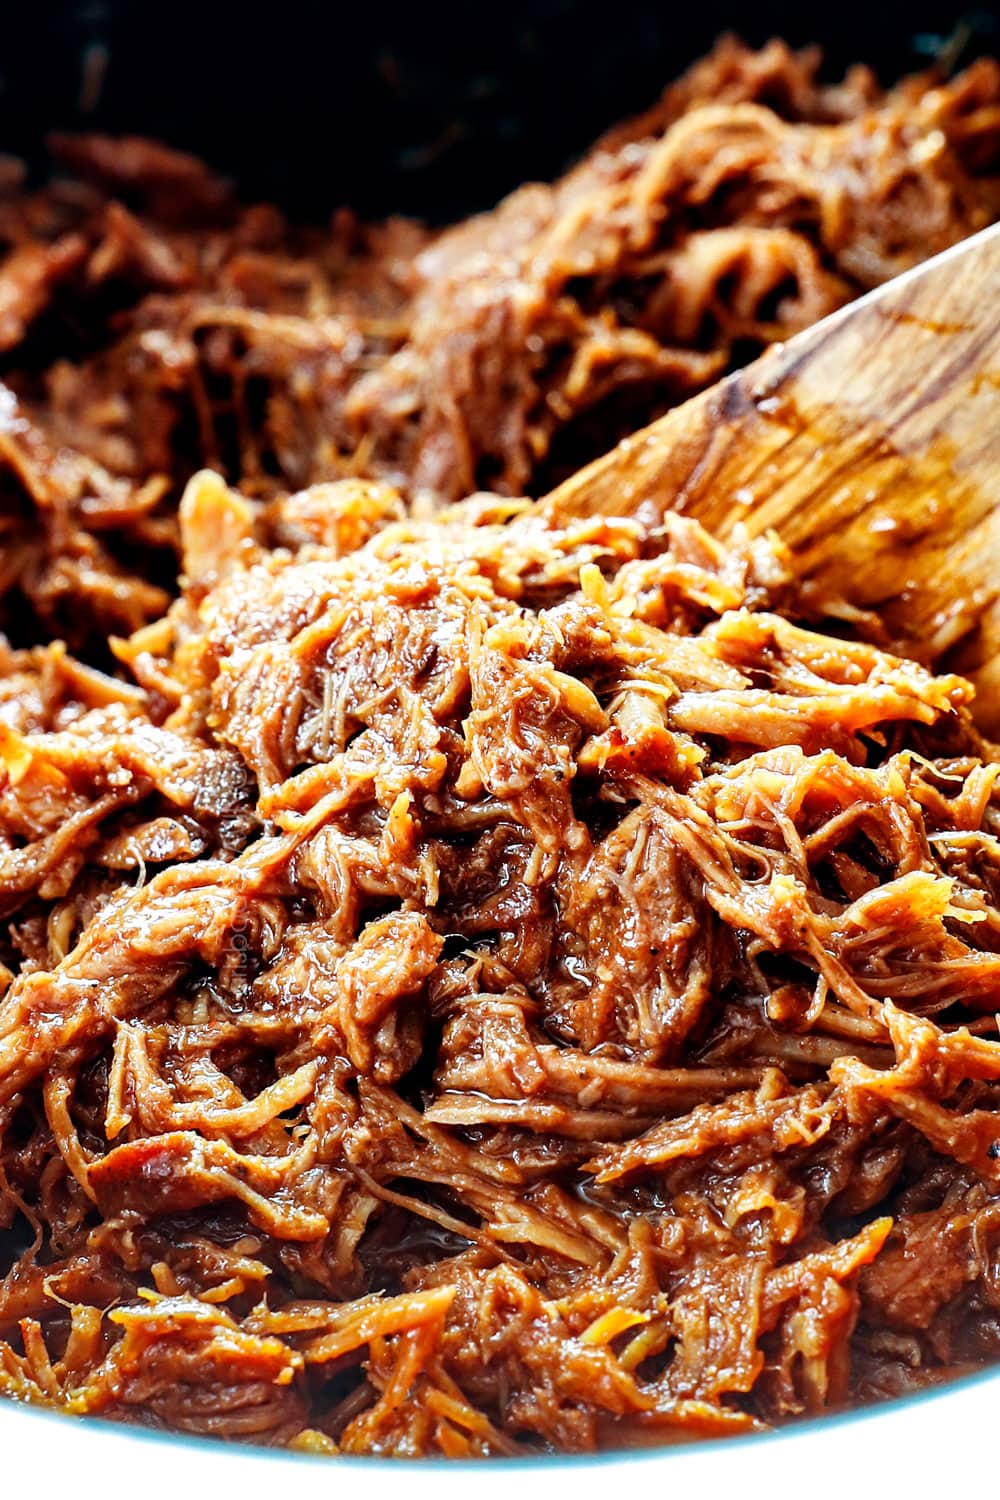 showing how to make BBQ pulled pork sandwiches by combining pulled pork with homemade barbecue sauce